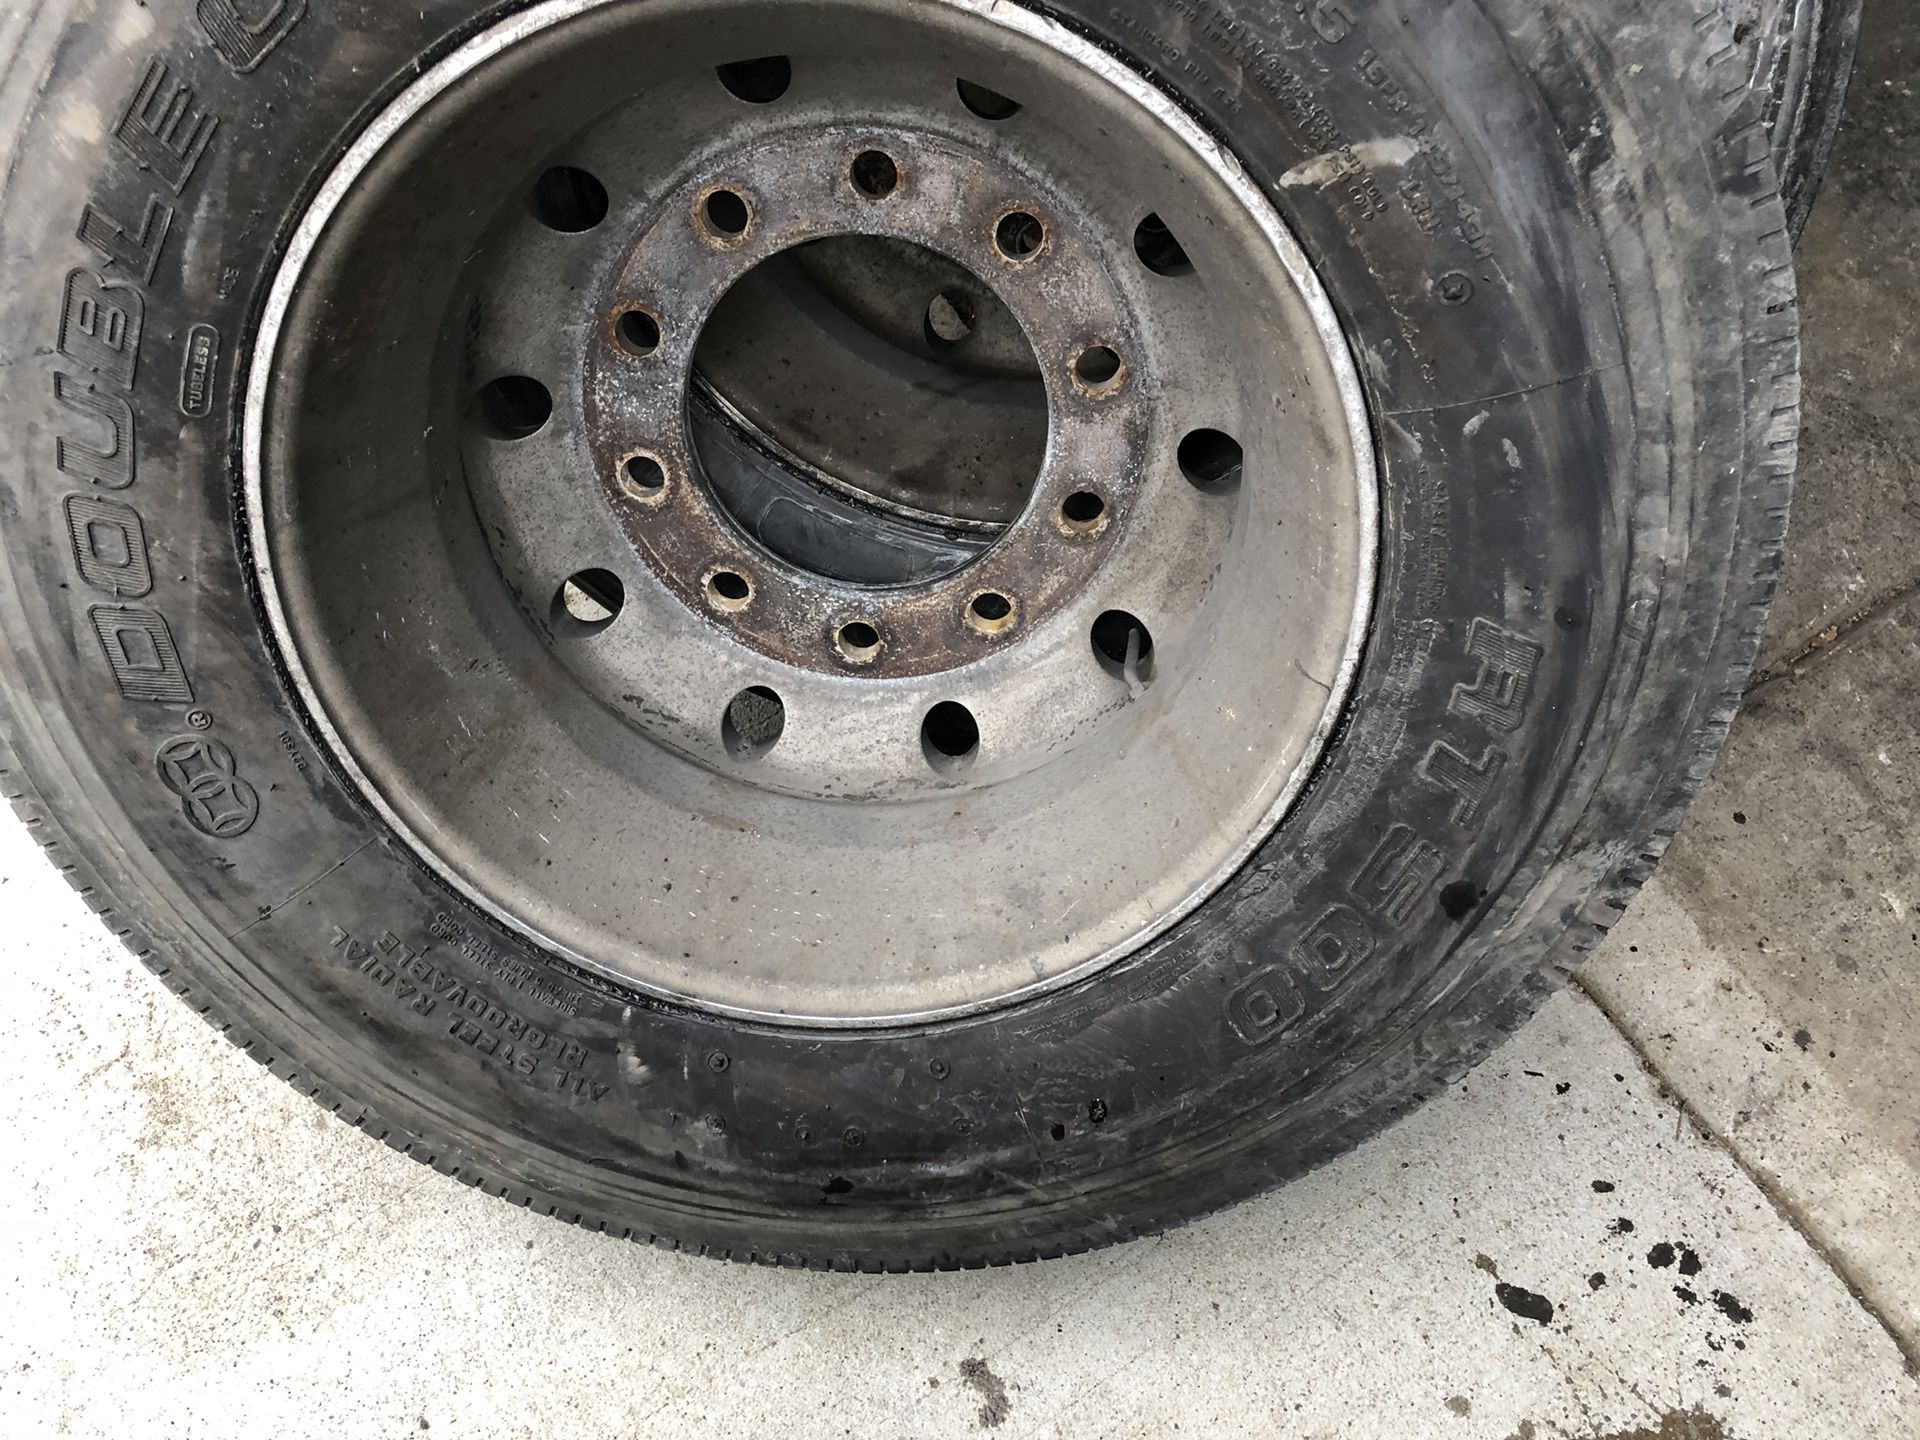 19.5 alcoa wheels with tires for Sale in Chicago, IL - OfferUp